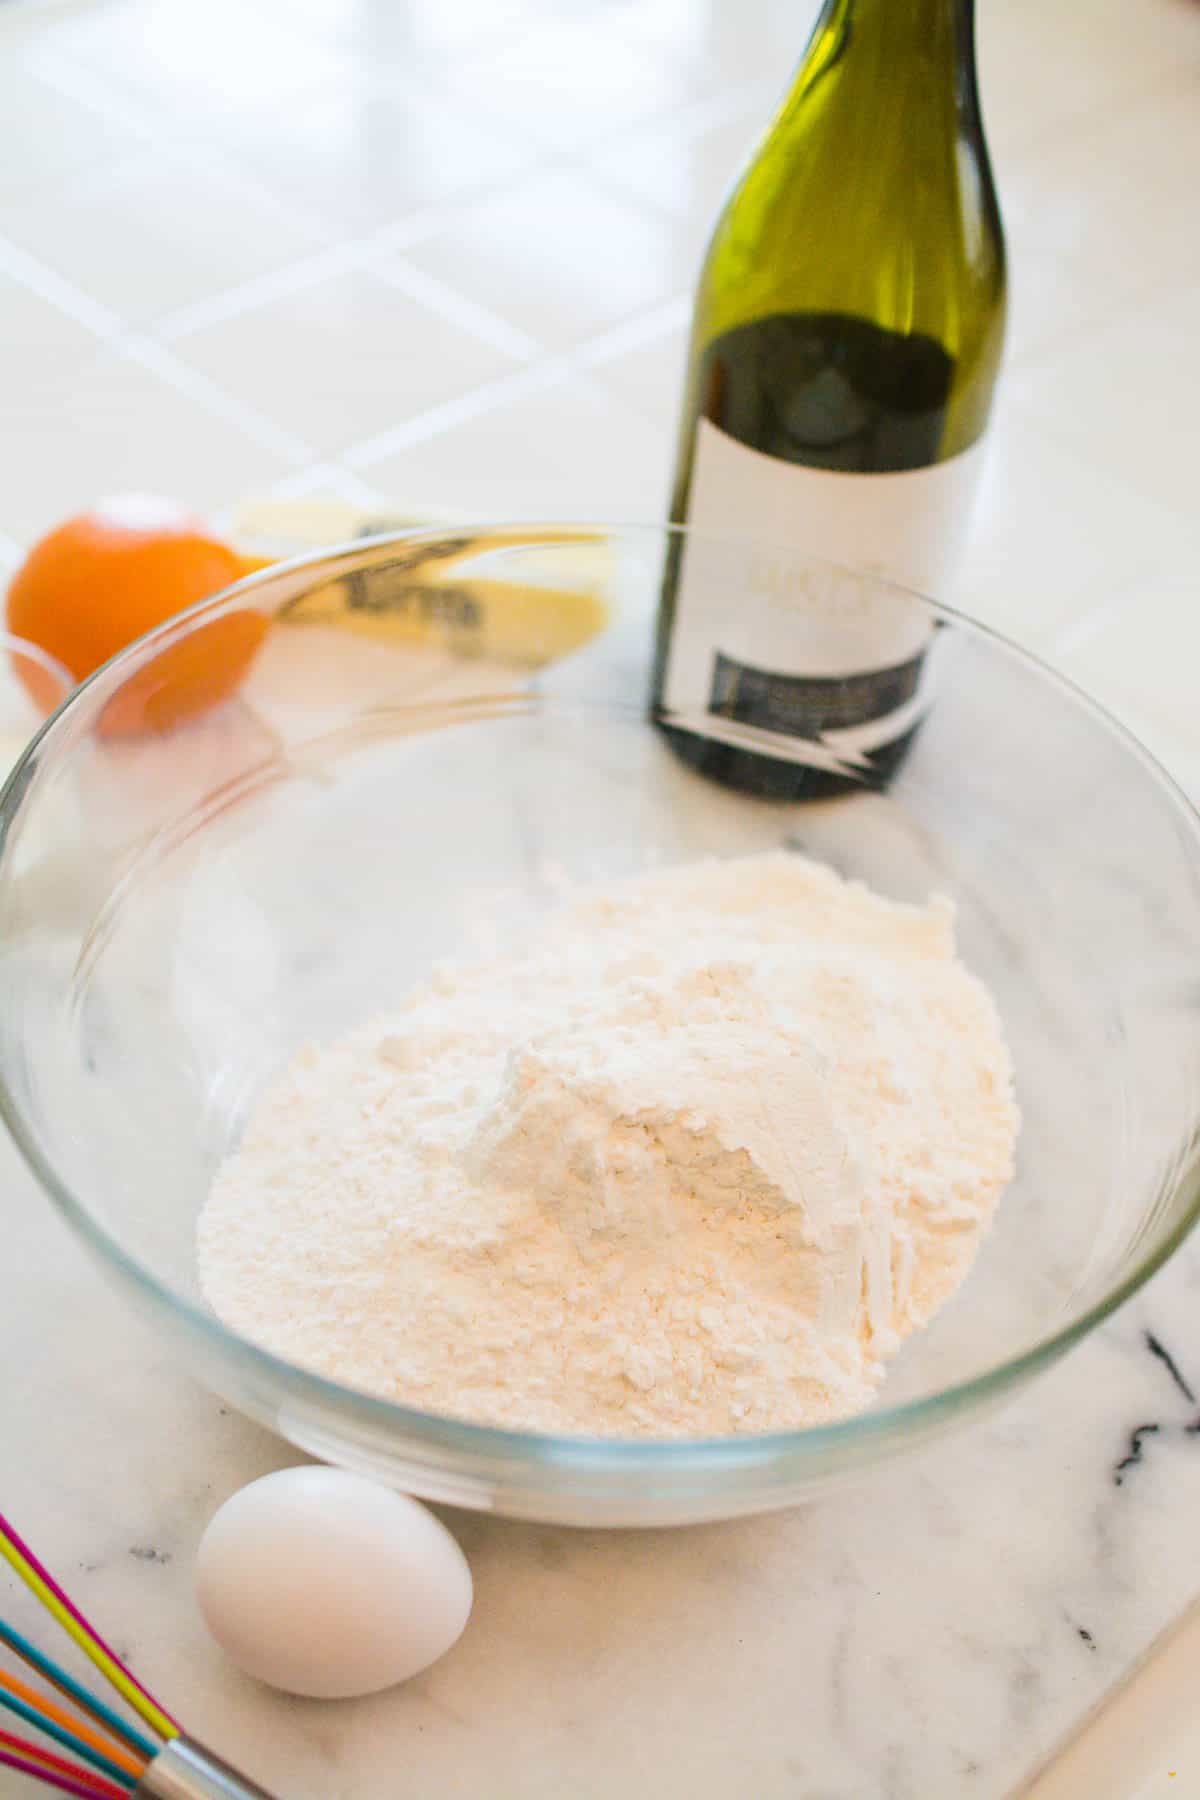 A glass bowl on a counter with boxed cake mix powder in it with an egg and bottle of wine next to it.